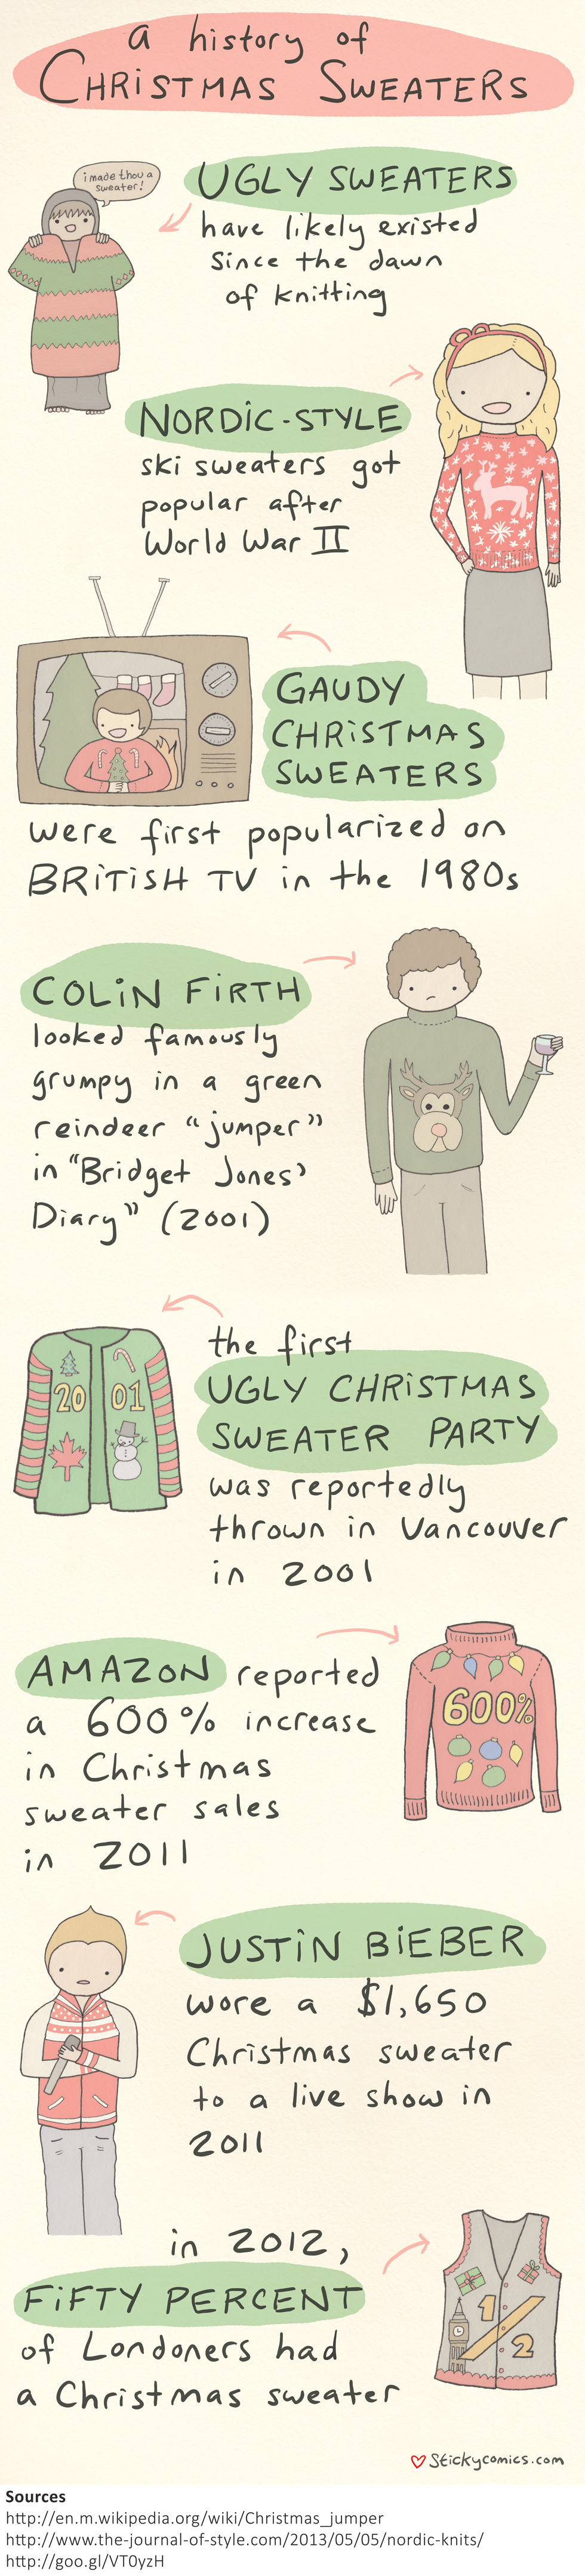 HIstory of Ugly Christmas Sweaters